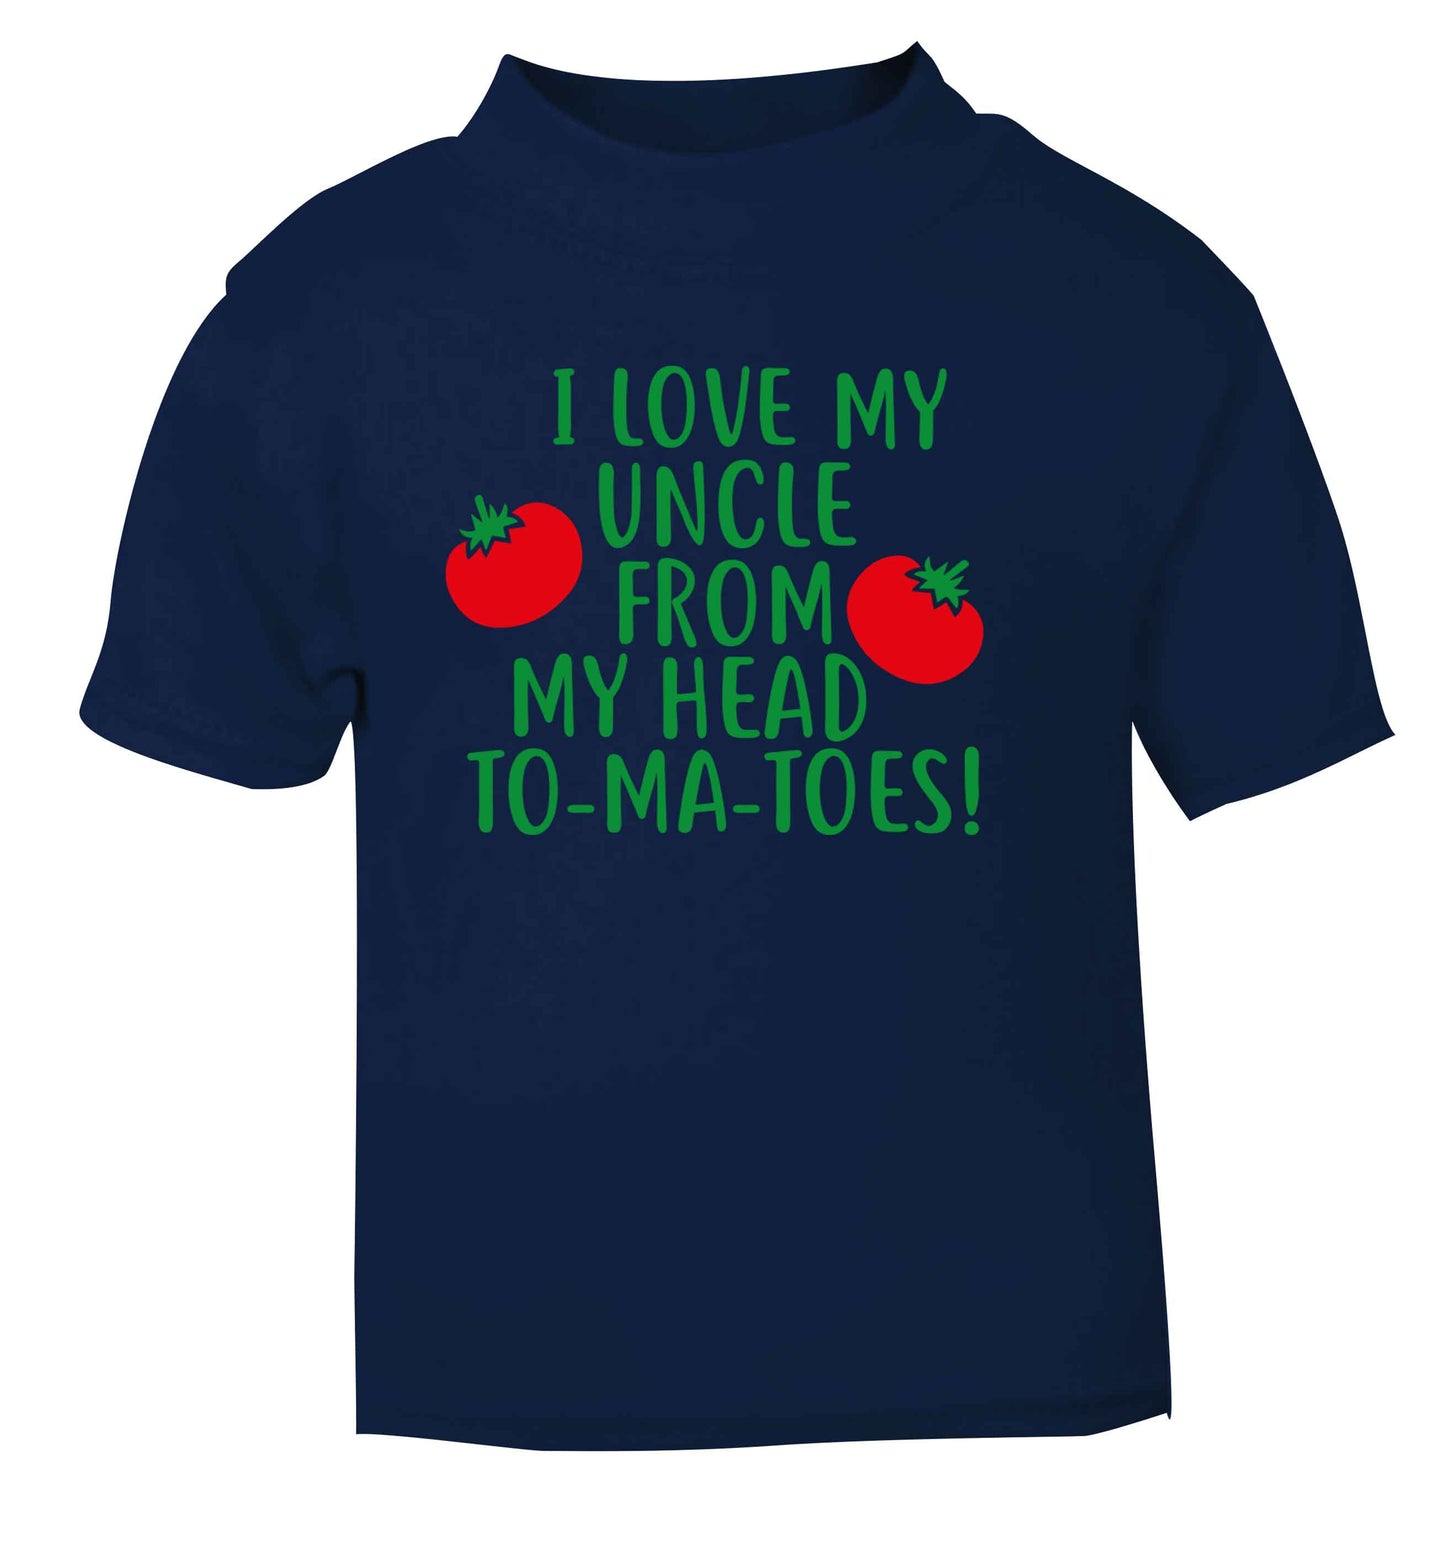 I love my uncle from my head To-Ma-Toes navy Baby Toddler Tshirt 2 Years